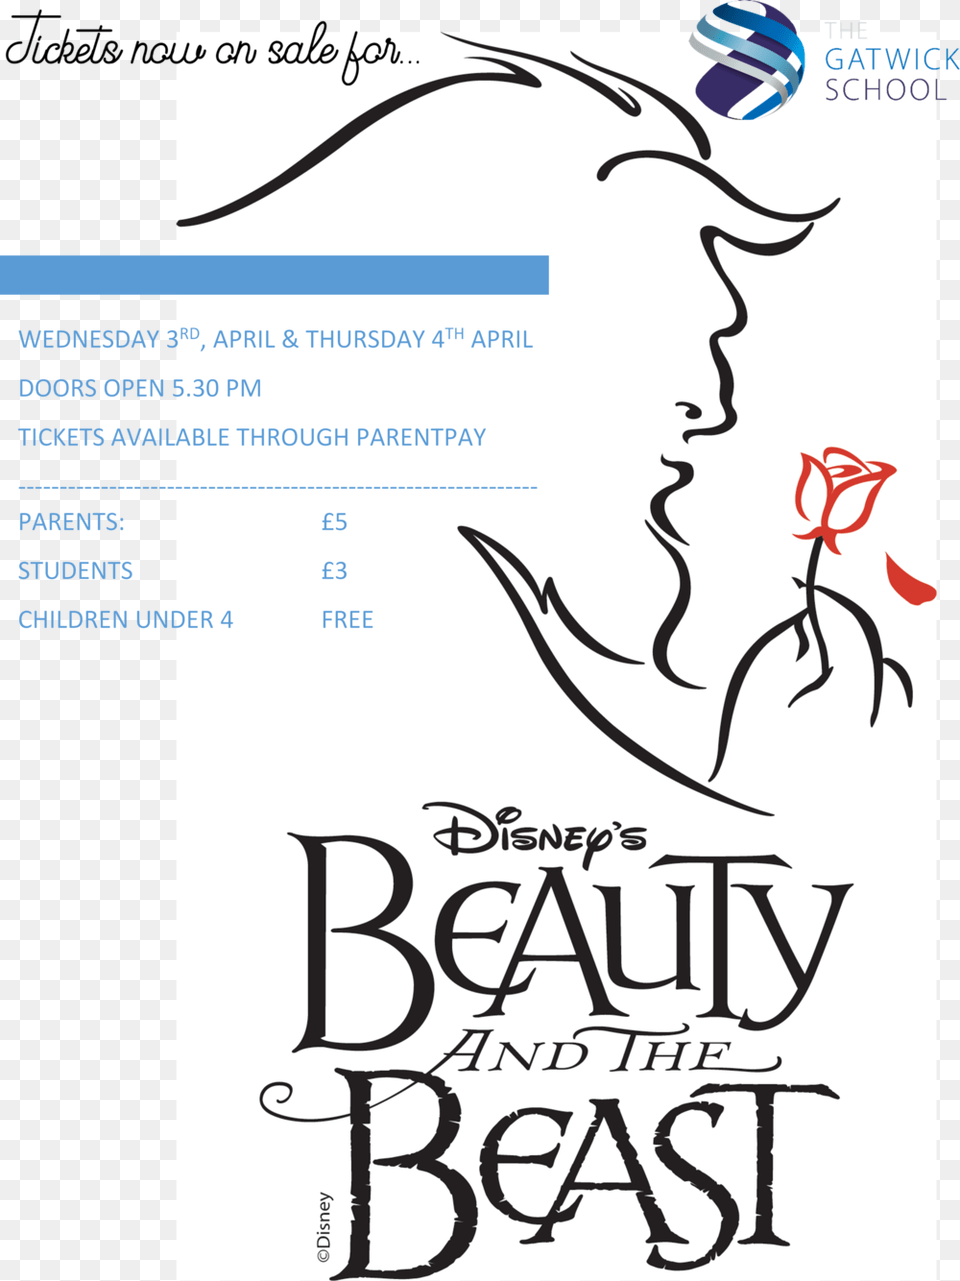 Batb Tickets Now On Sale Beauty And The Beast Wording, Book, Publication, Advertisement, Poster Free Png